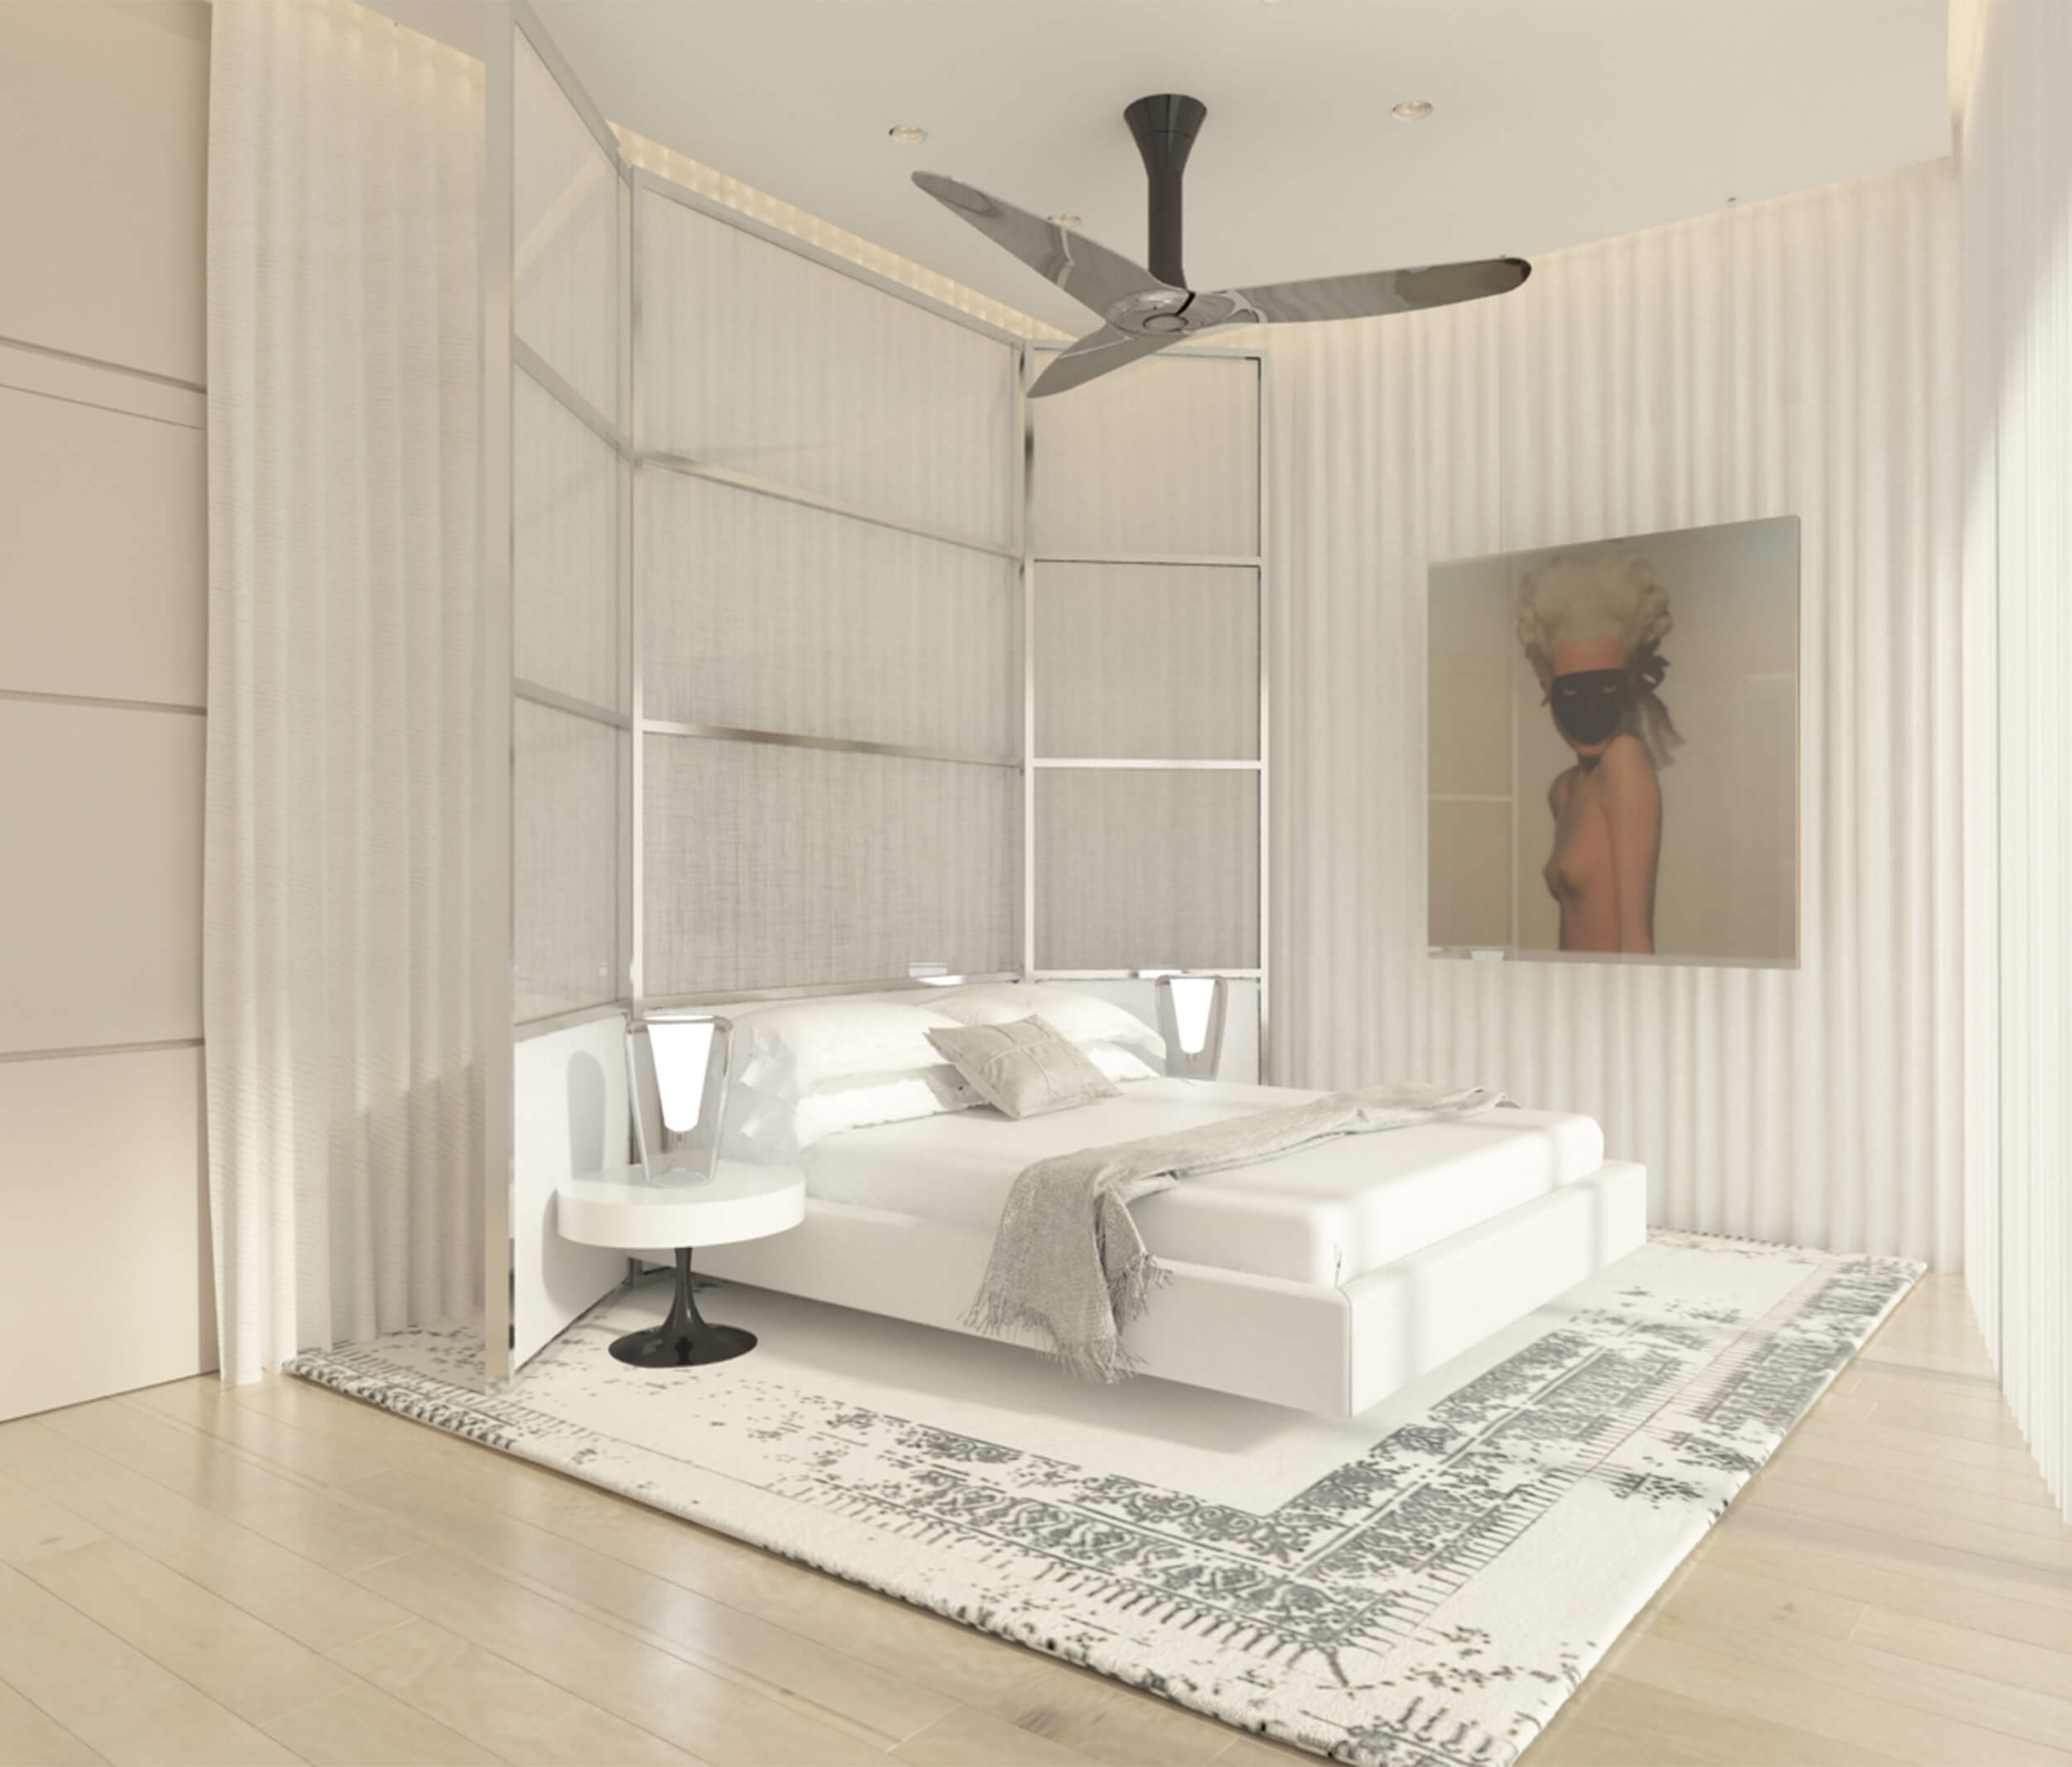 Bedroom design by Britto Charette for the PH at Ritz Carlton Residences in Sunny Isles Beach